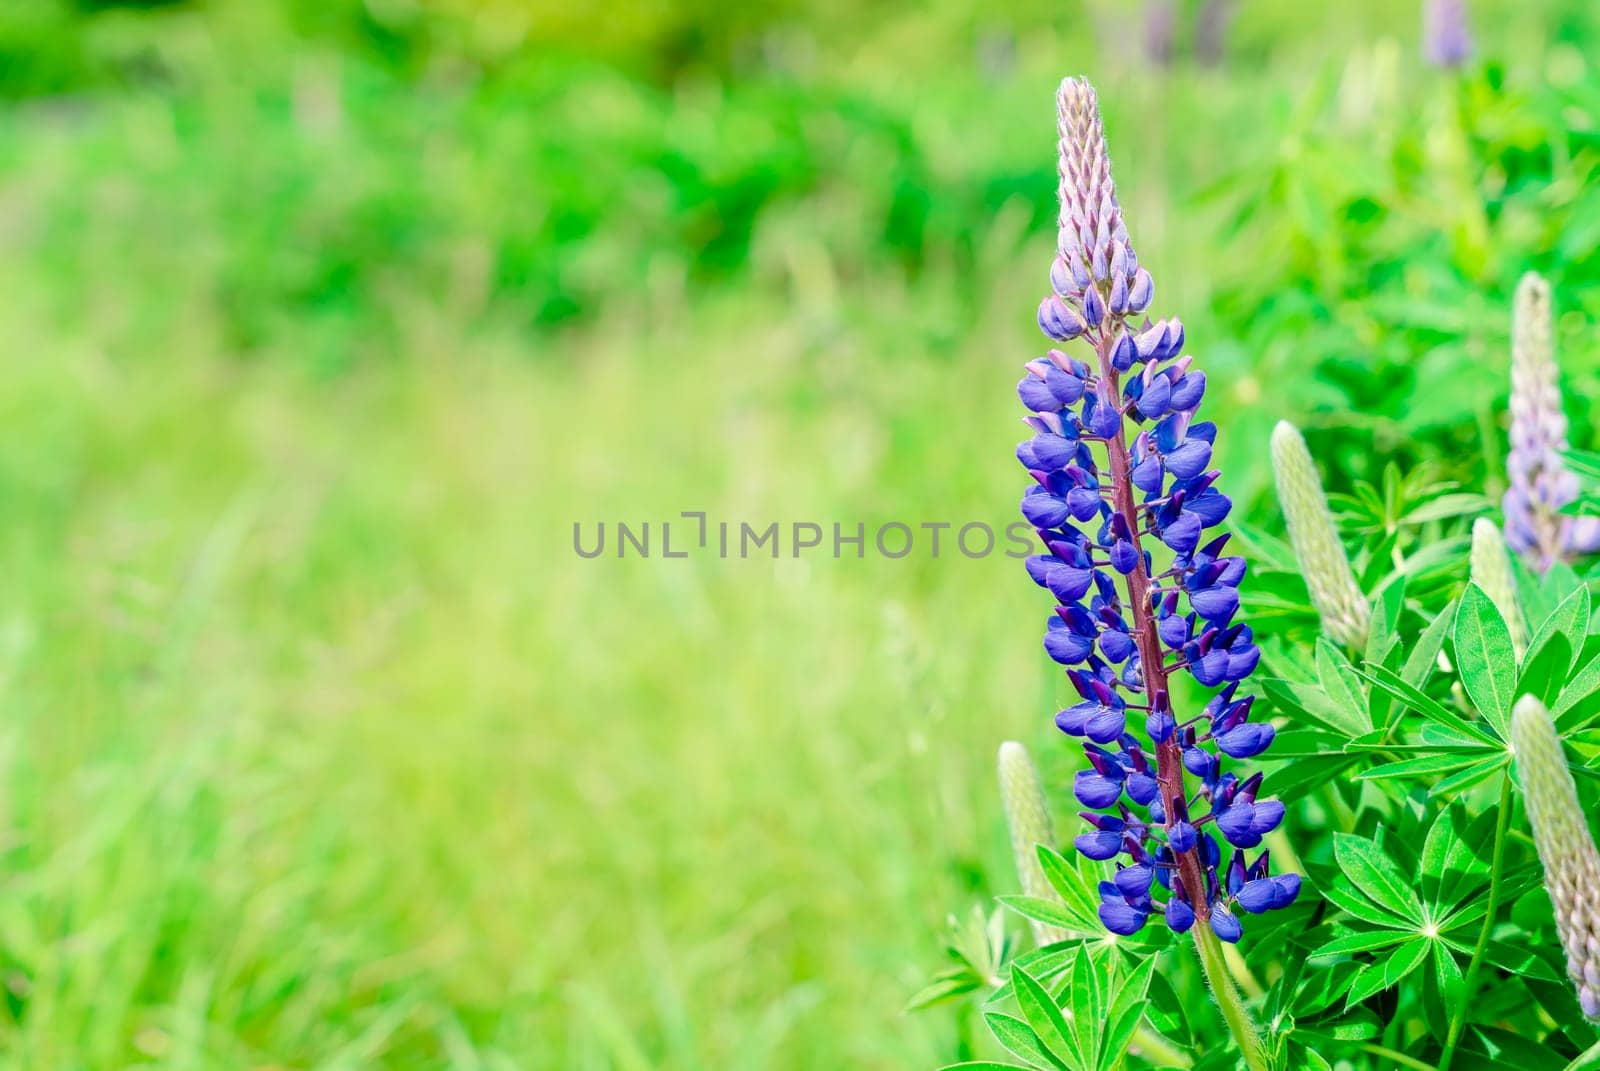 lupine flowers on meadow at sunset on a warm summer day  Summer flowers.  Summertime  Space for text  High quality photo